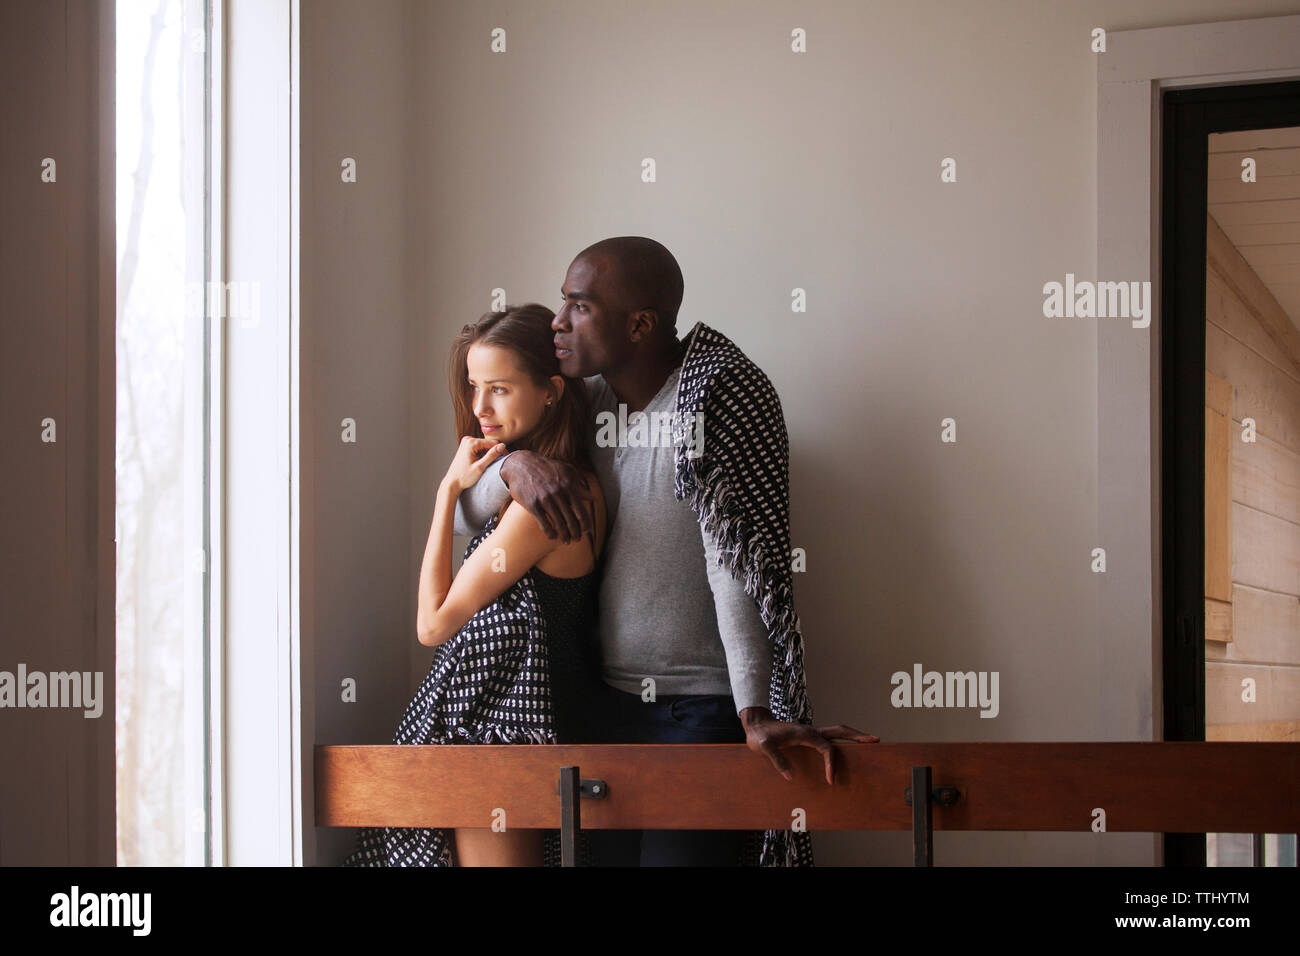 Couple looking away while standing by railing at home Stock Photo